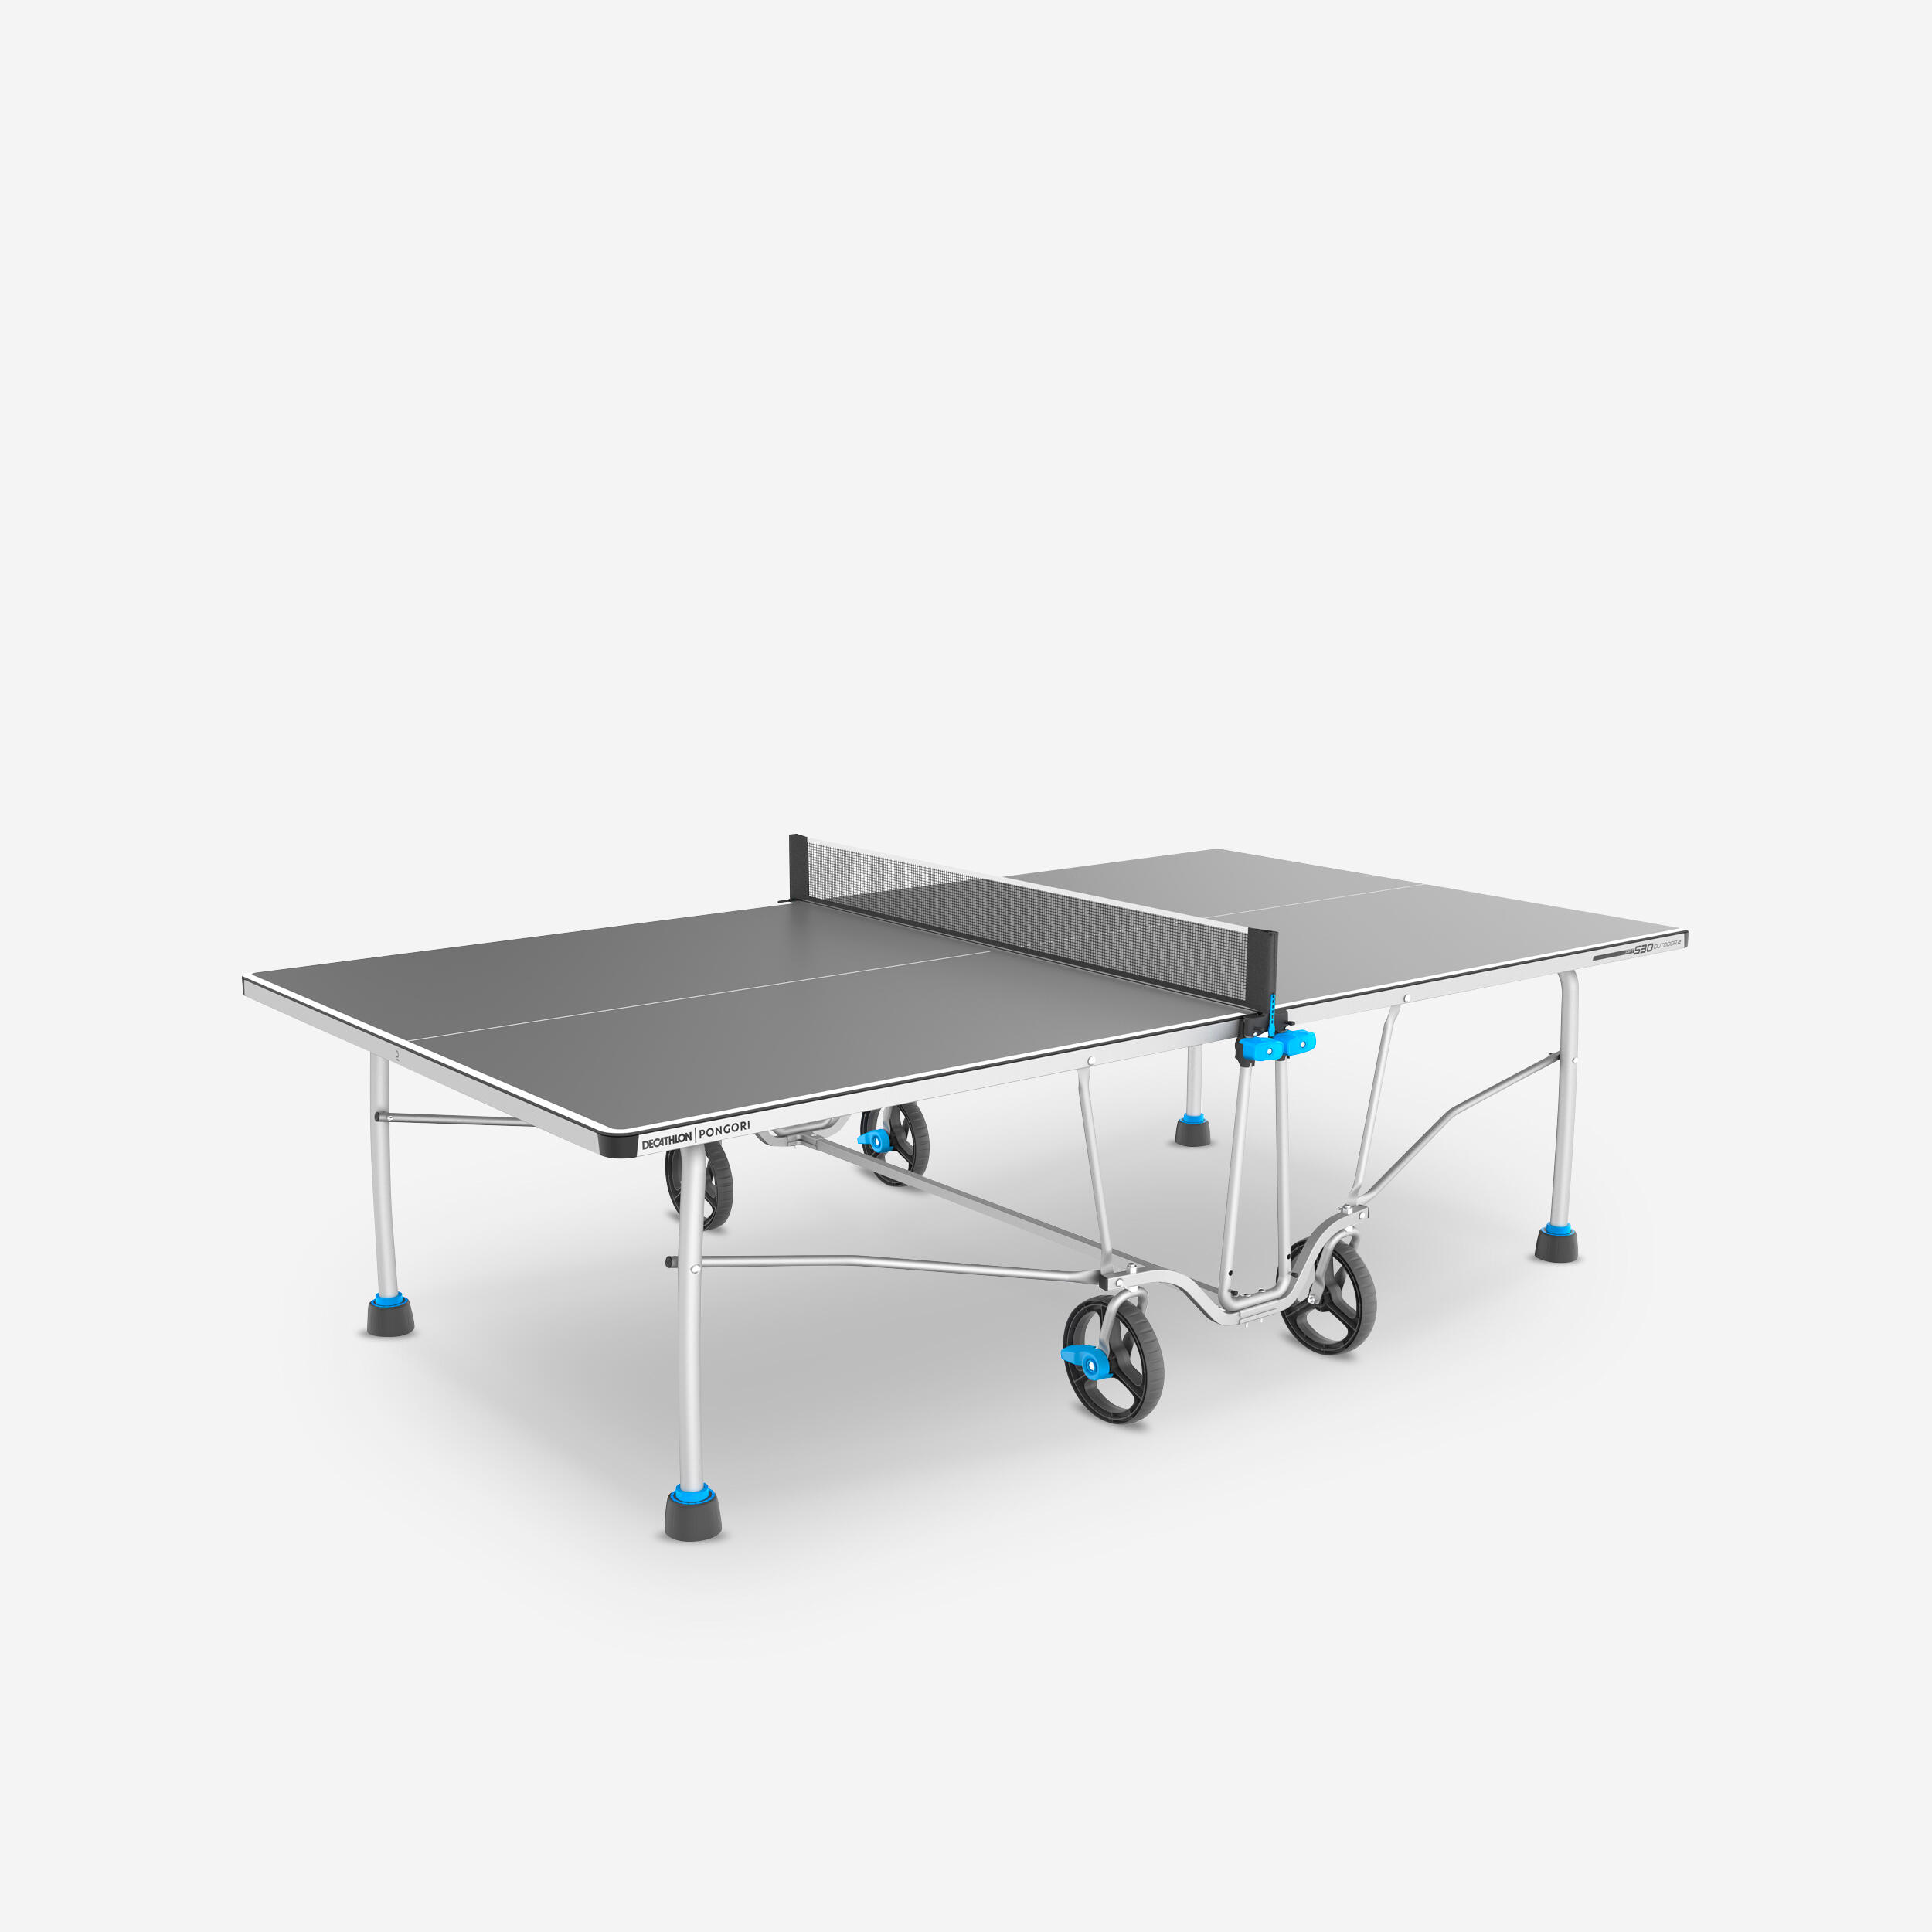 Outdoor Table Tennis Table PPT 530.2 - Grey 1/13